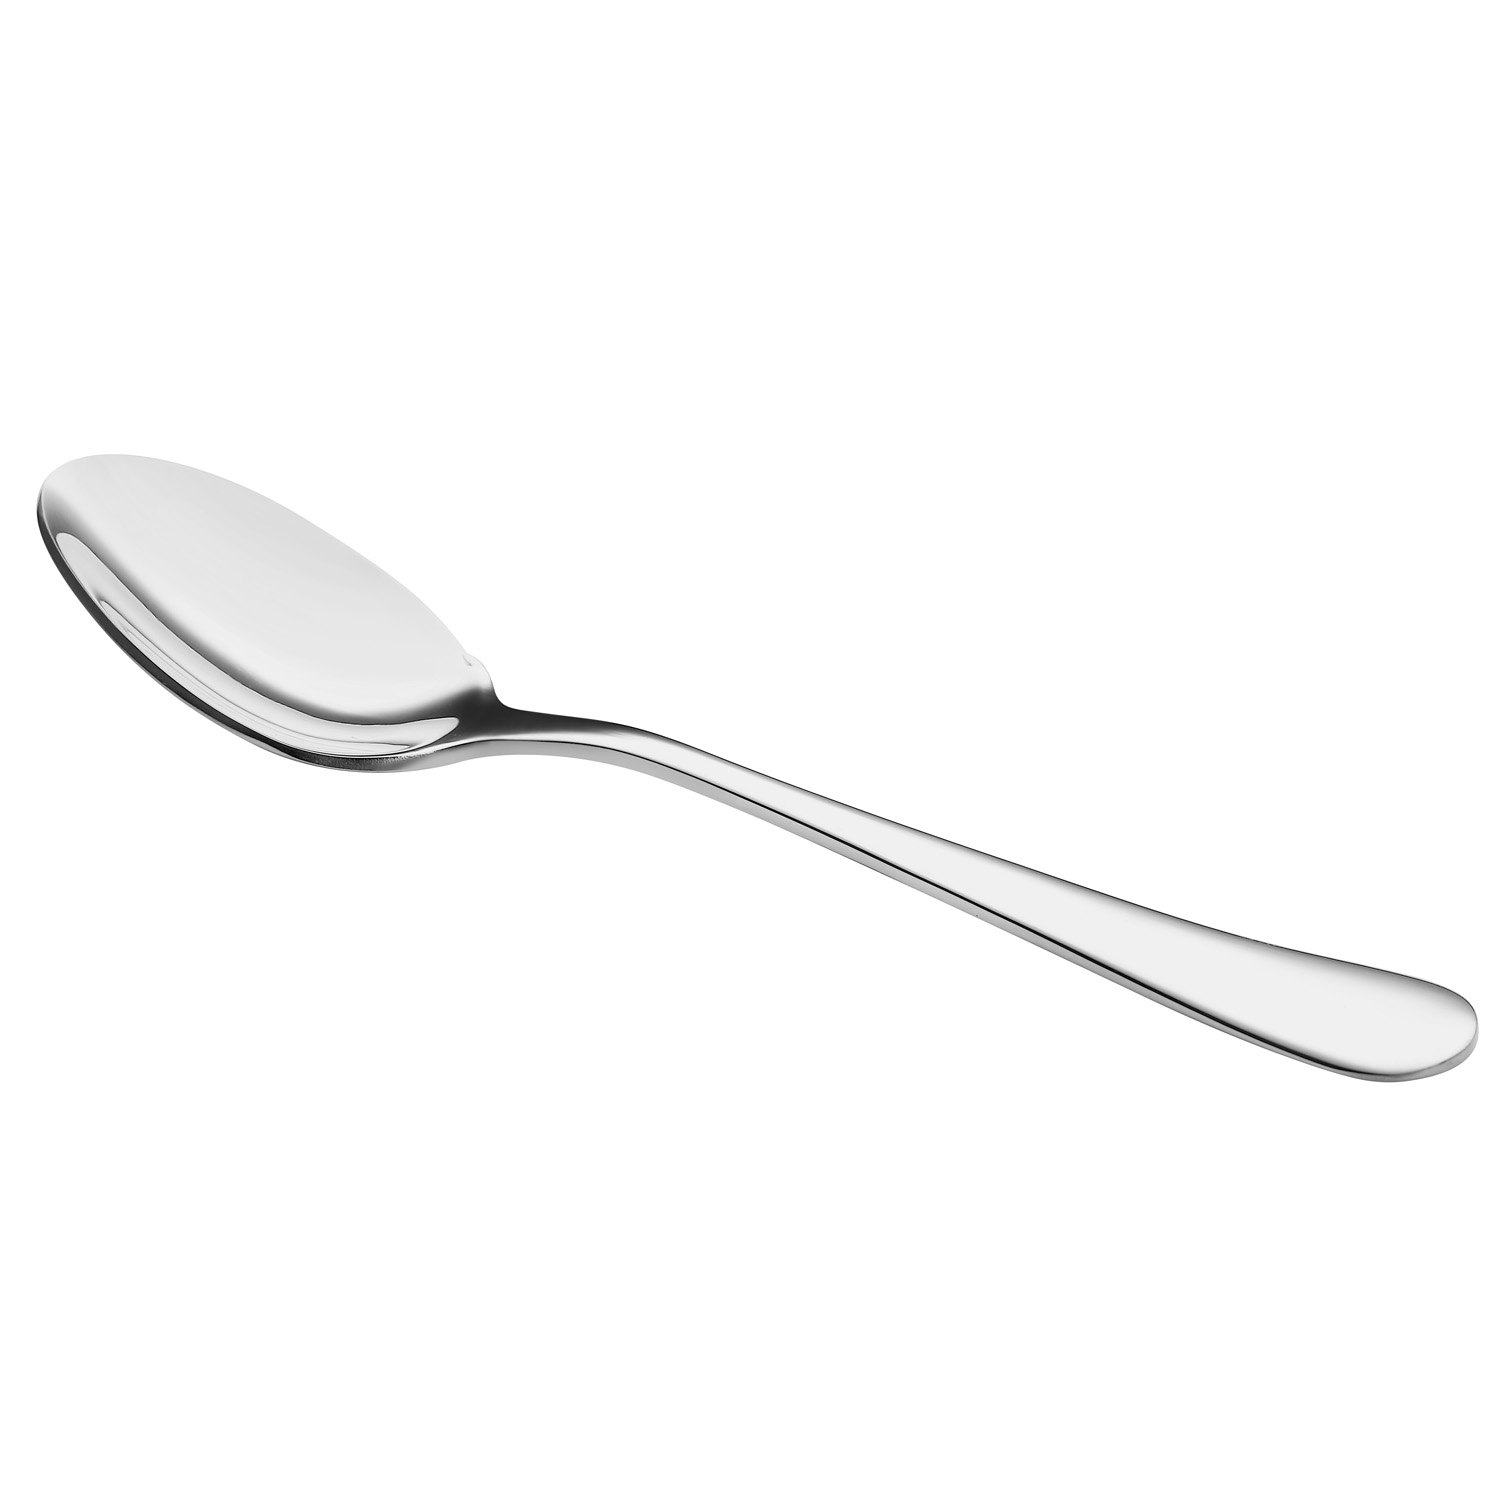 CAC China 8003-03 Noble Dinner Spoon, Extra Heavyweight 18/8, 7 3/8"